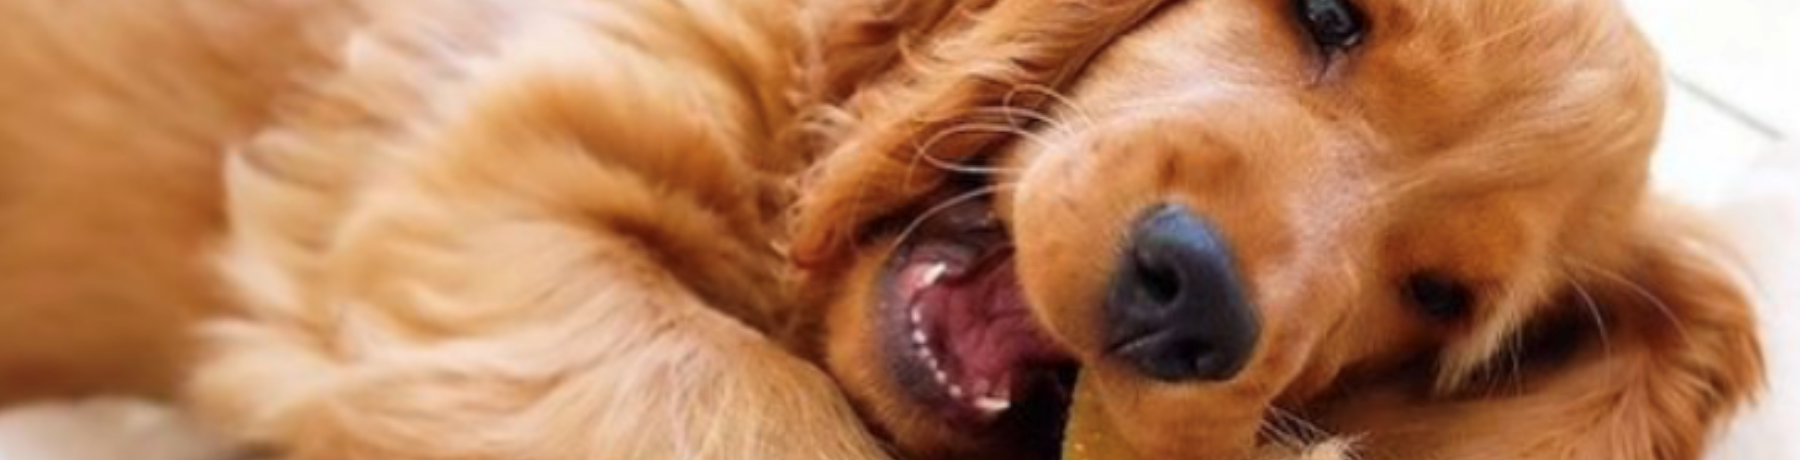 BRUSH UP ON YOUR PUP’S DENTAL CARE image